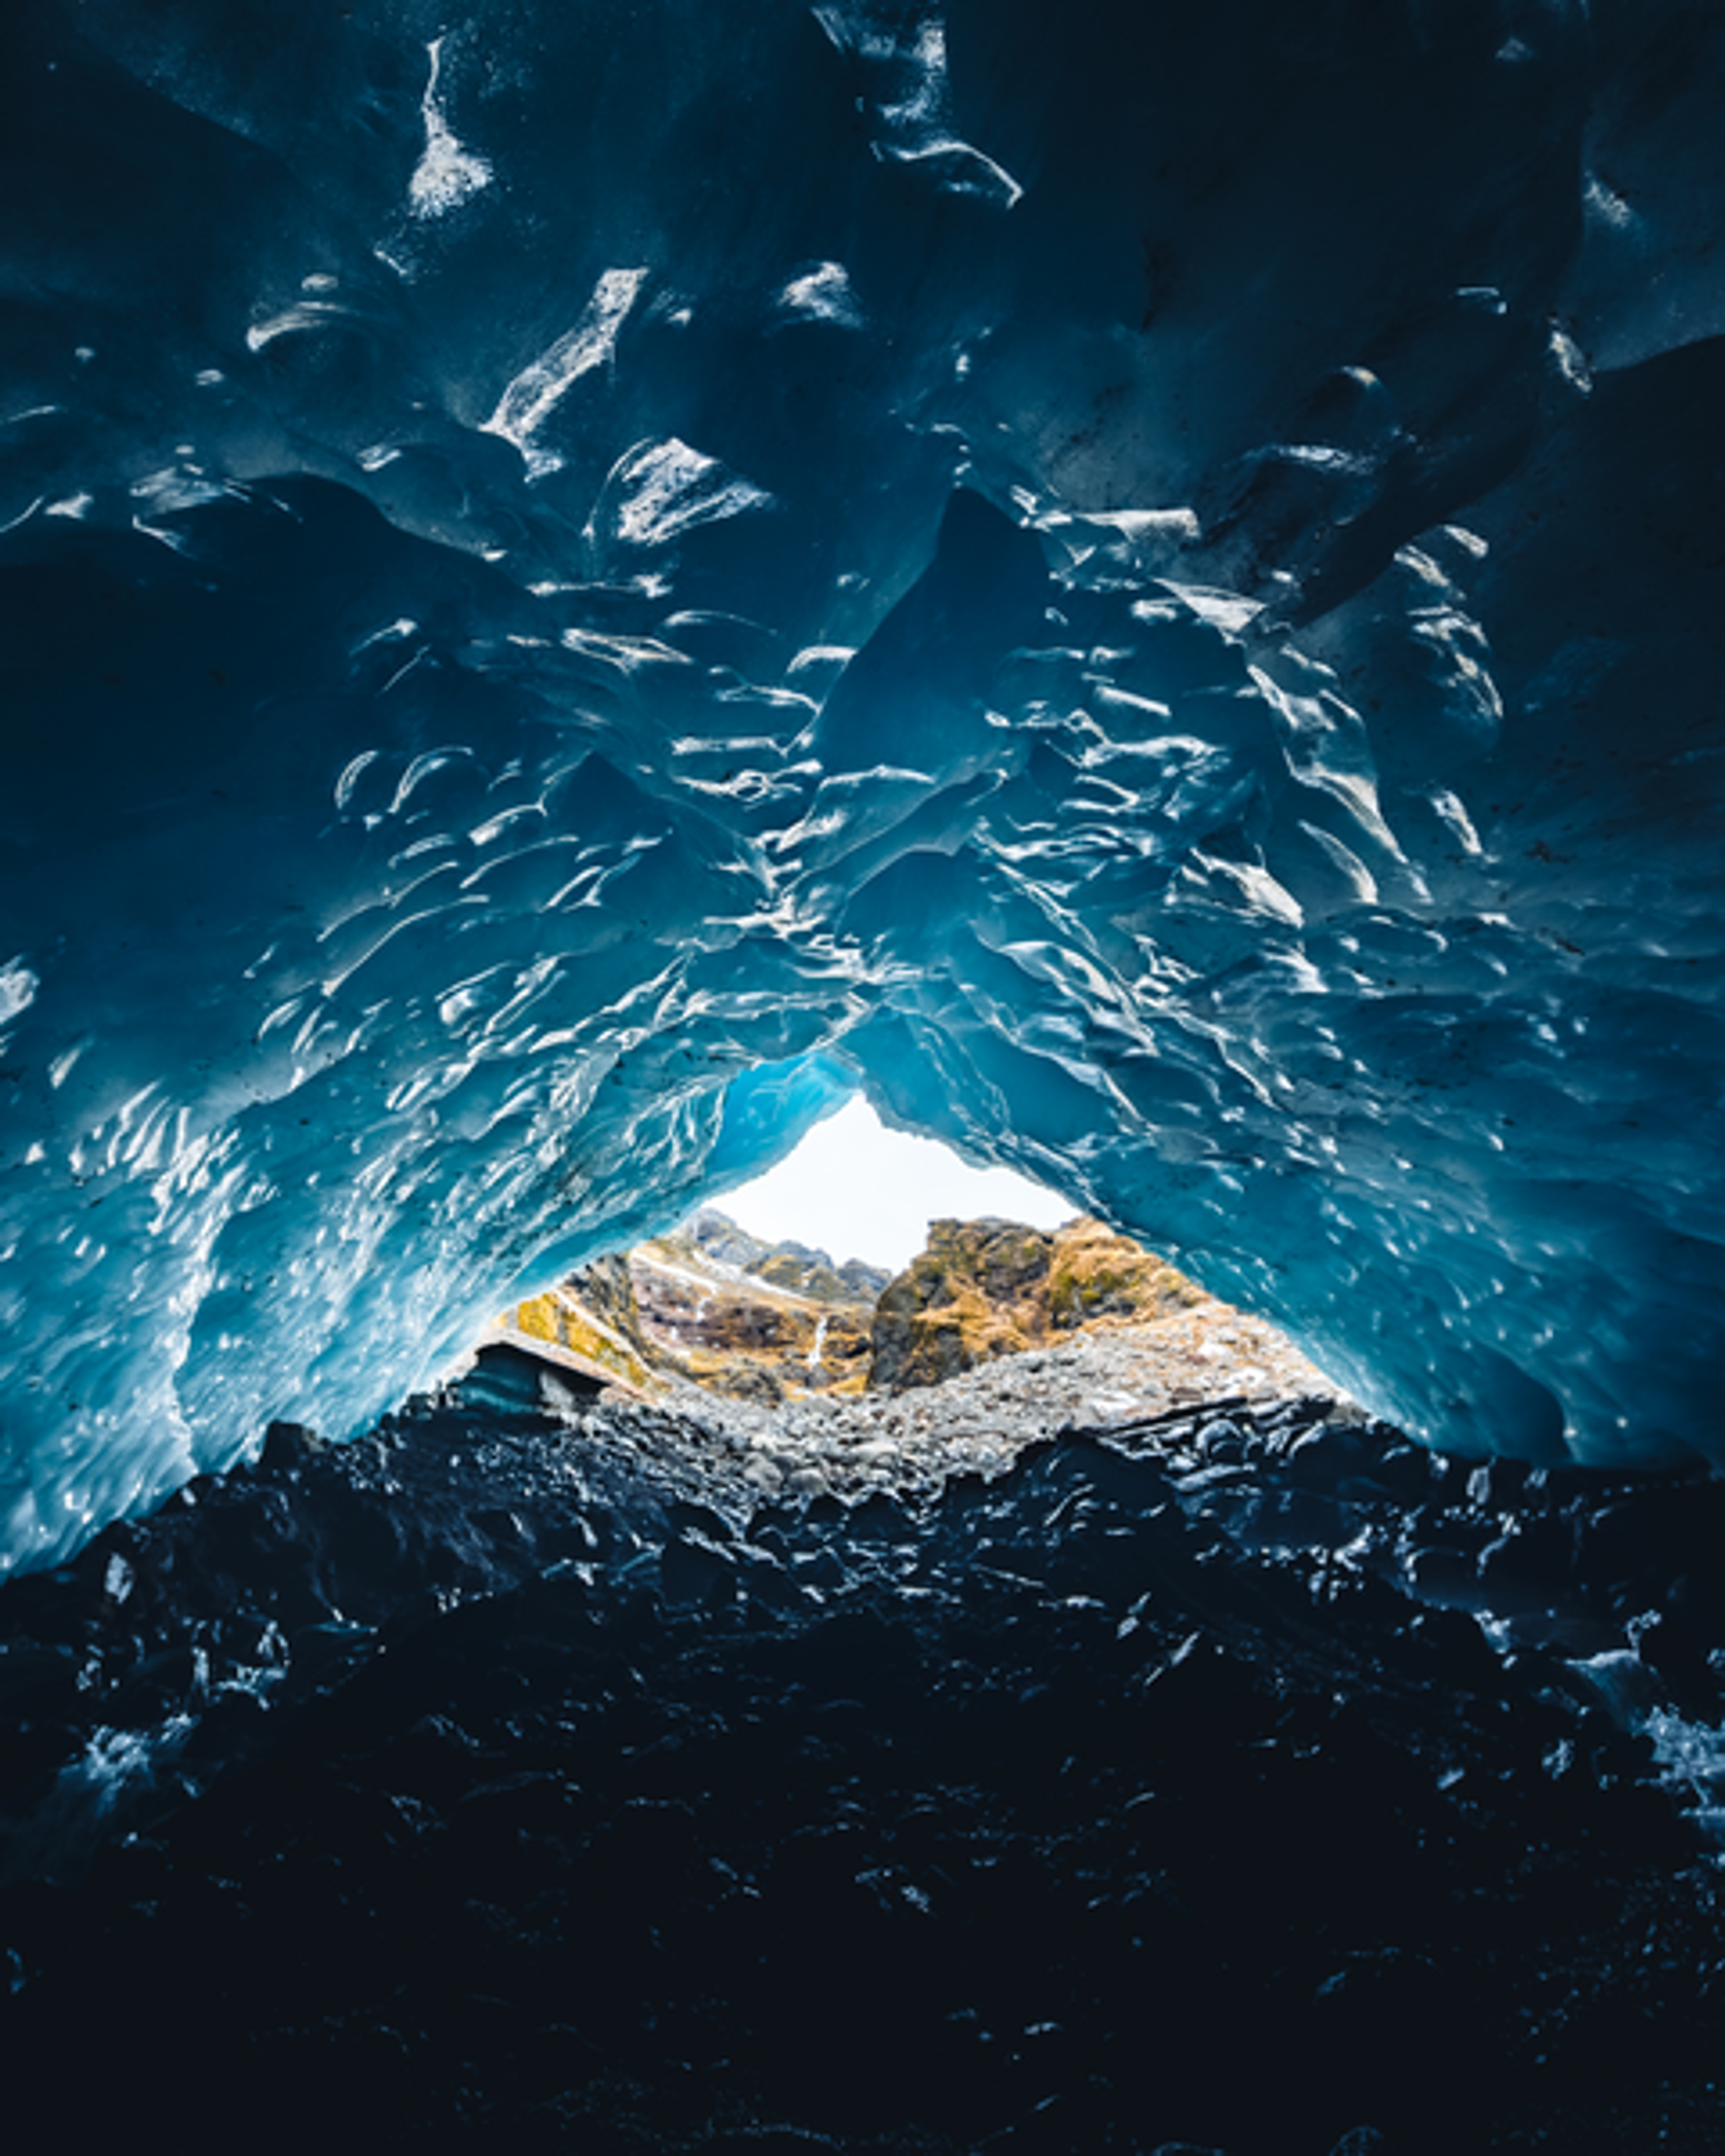 View from inside an Ice cave in Iceland